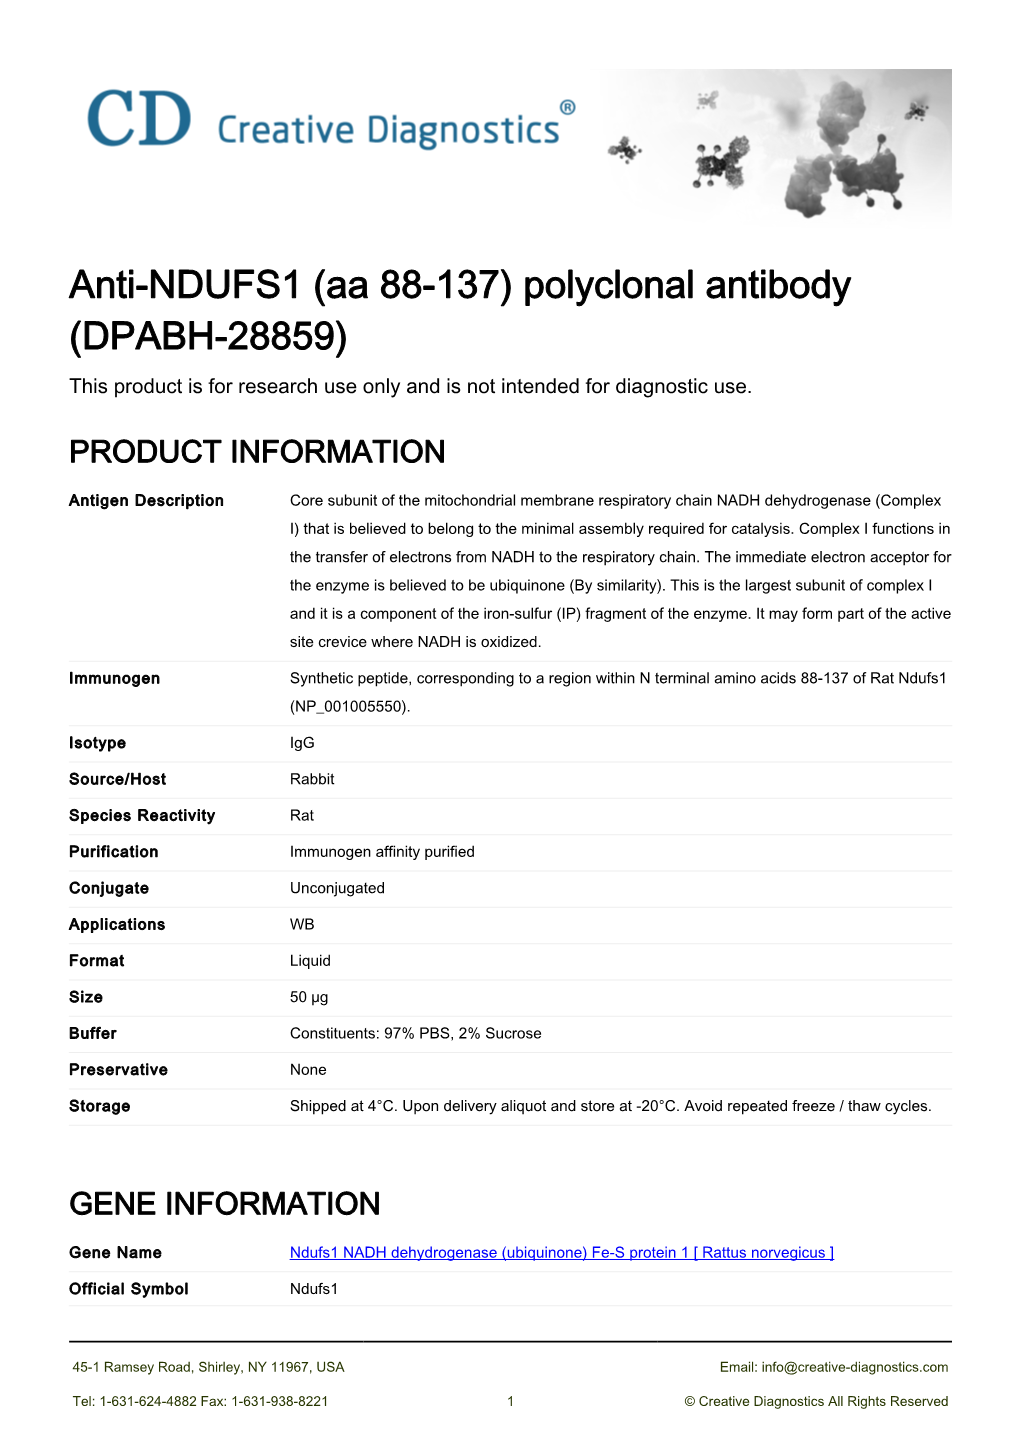 Anti-NDUFS1 (Aa 88-137) Polyclonal Antibody (DPABH-28859) This Product Is for Research Use Only and Is Not Intended for Diagnostic Use